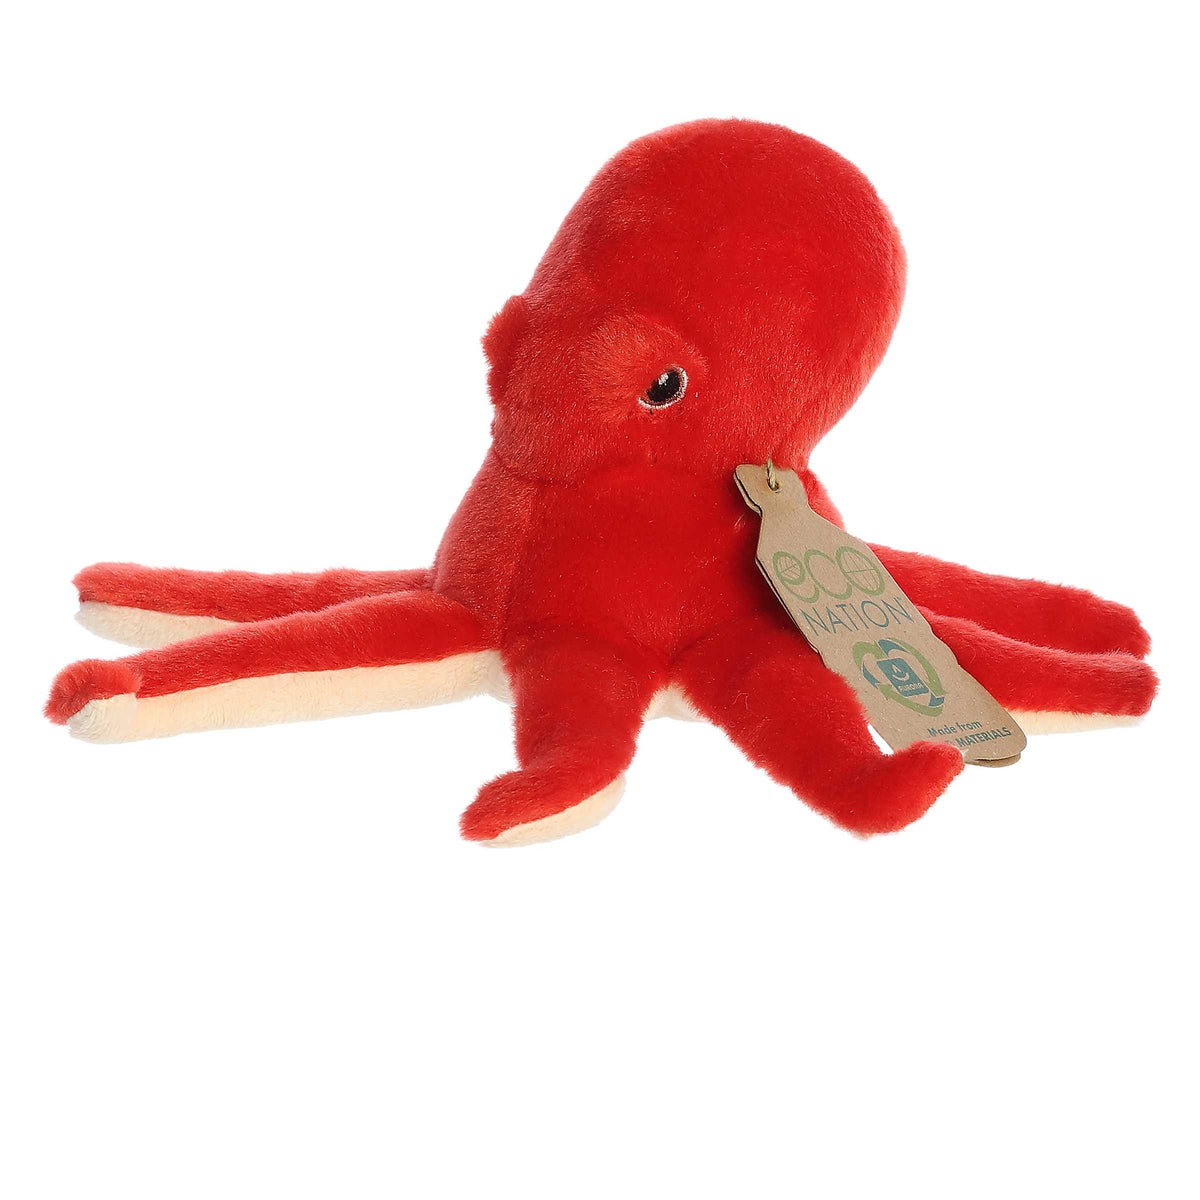 Eco Softie Octopus Plush in vibrant red, made from recycled materials, with a hang tag representing eco-sustainability.